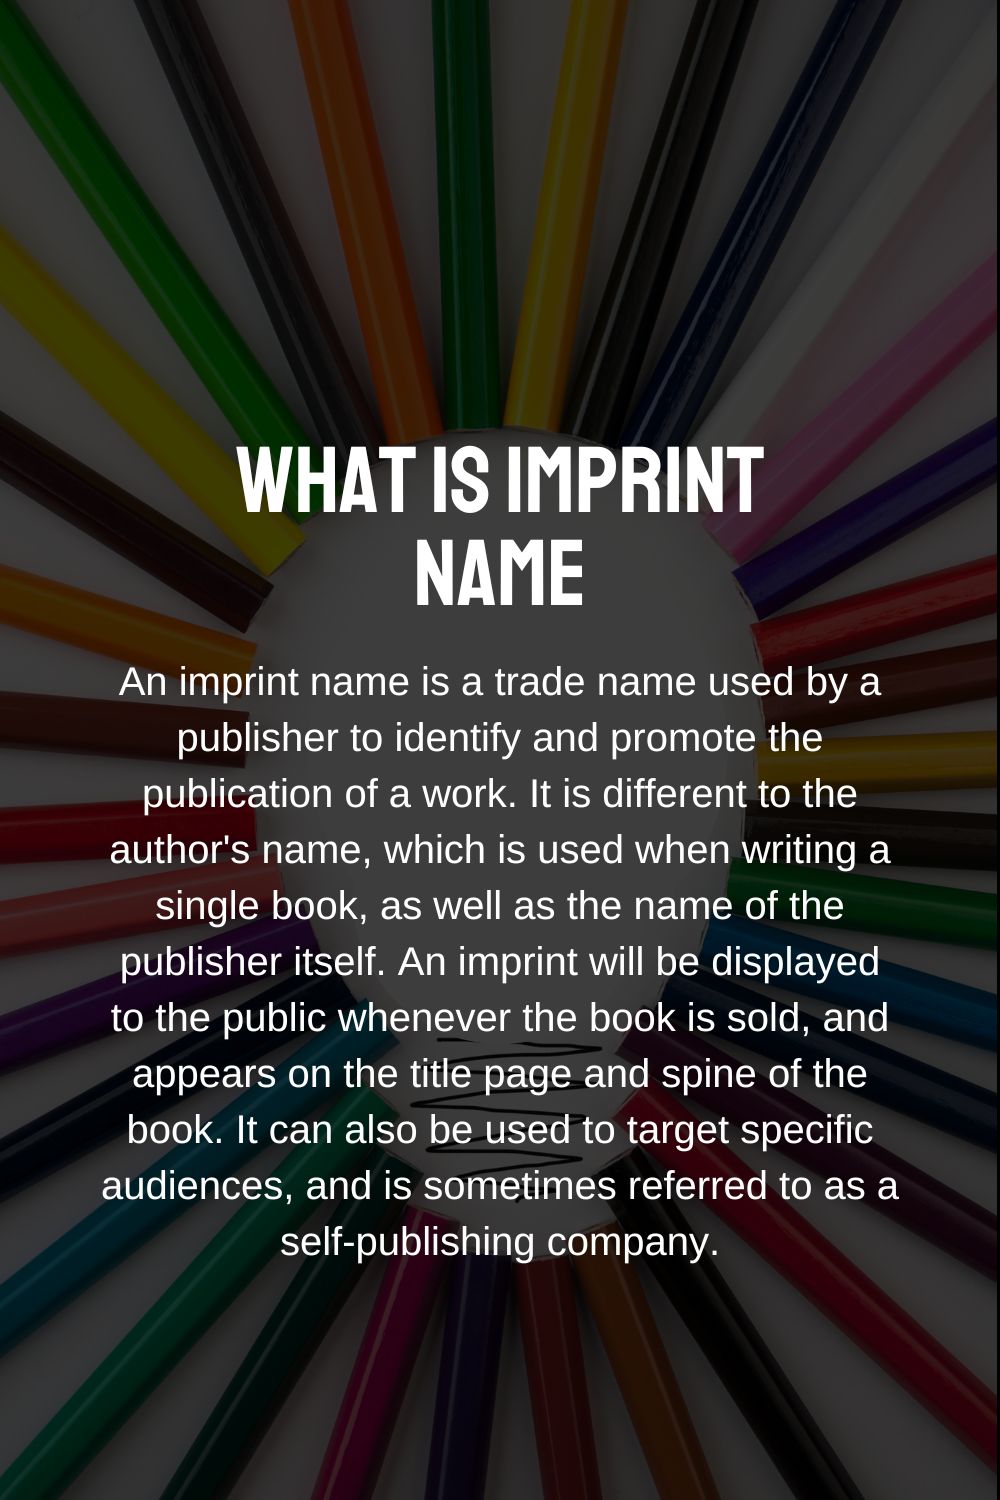 What is imprint name